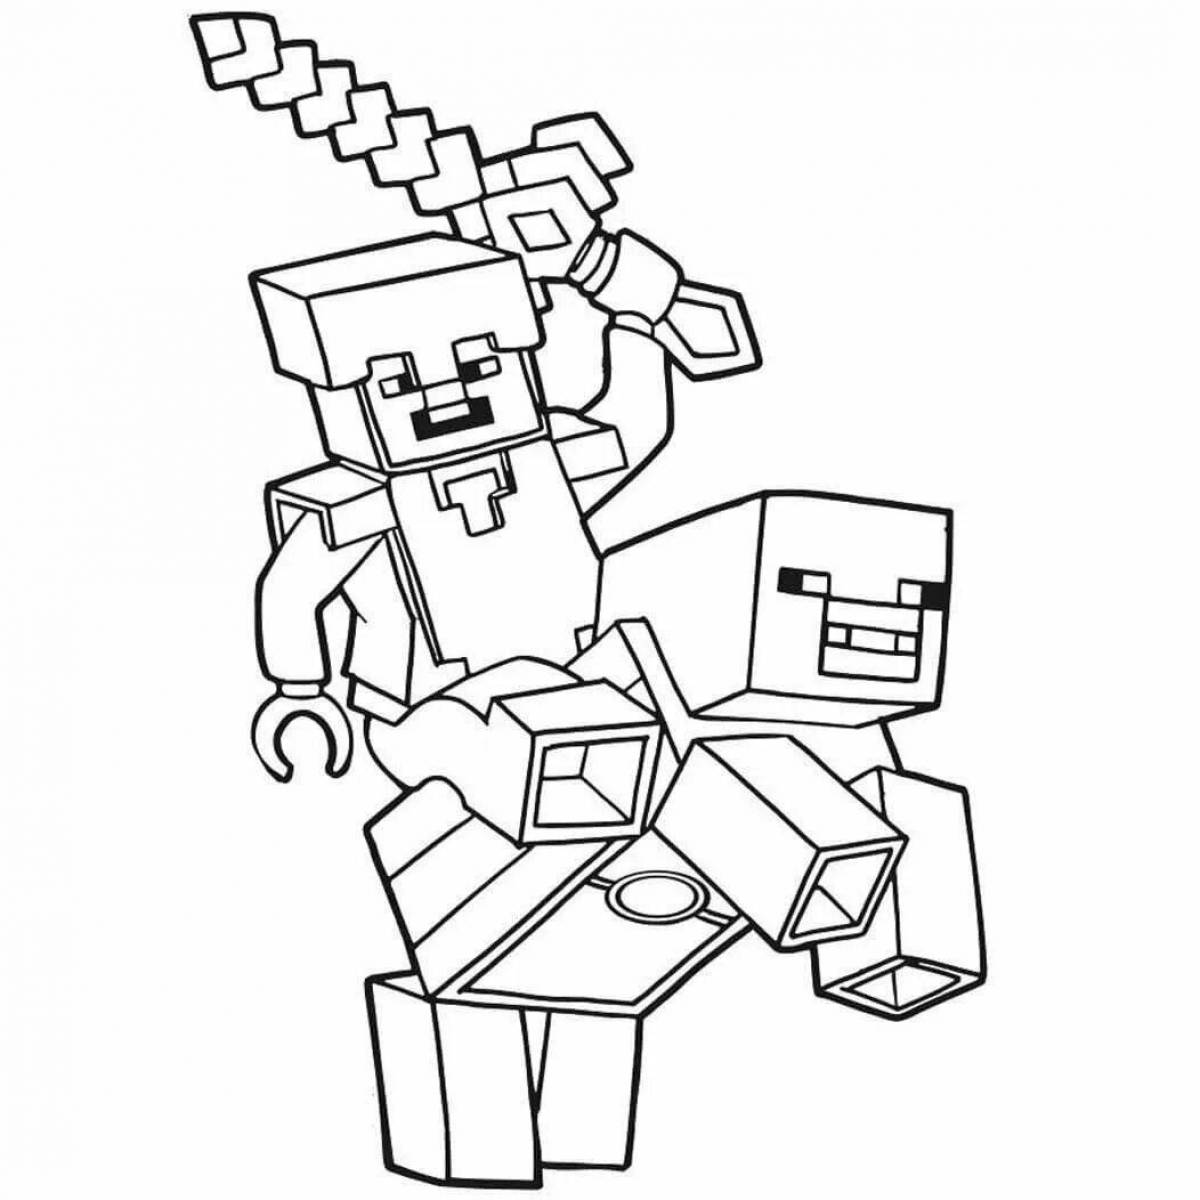 Excellent minecraft coloring